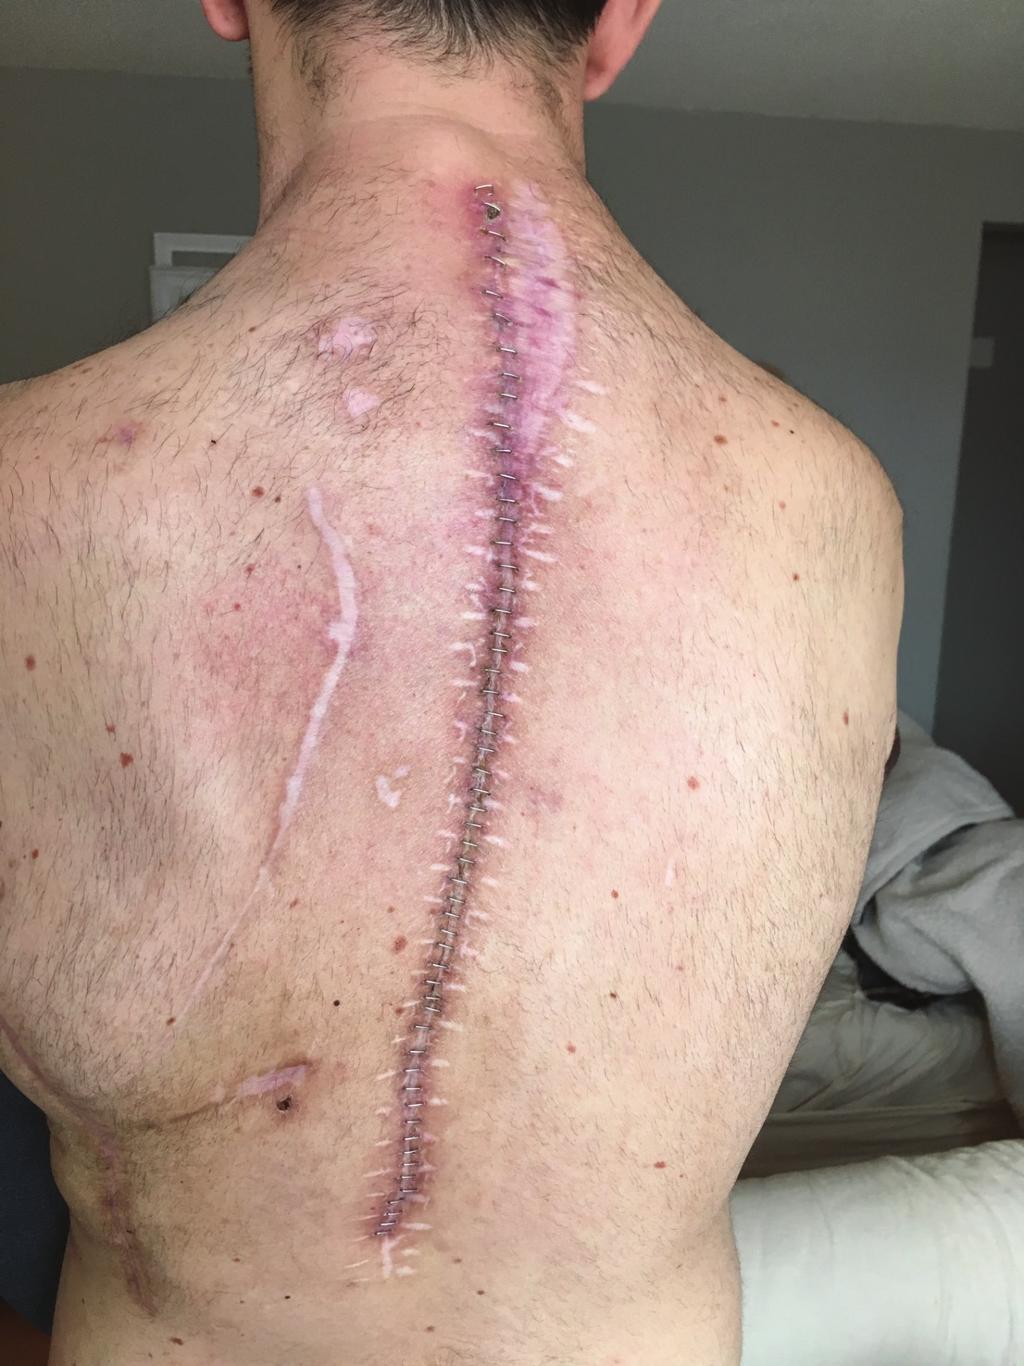 1 1. This is an incision that is healing well after radiation and